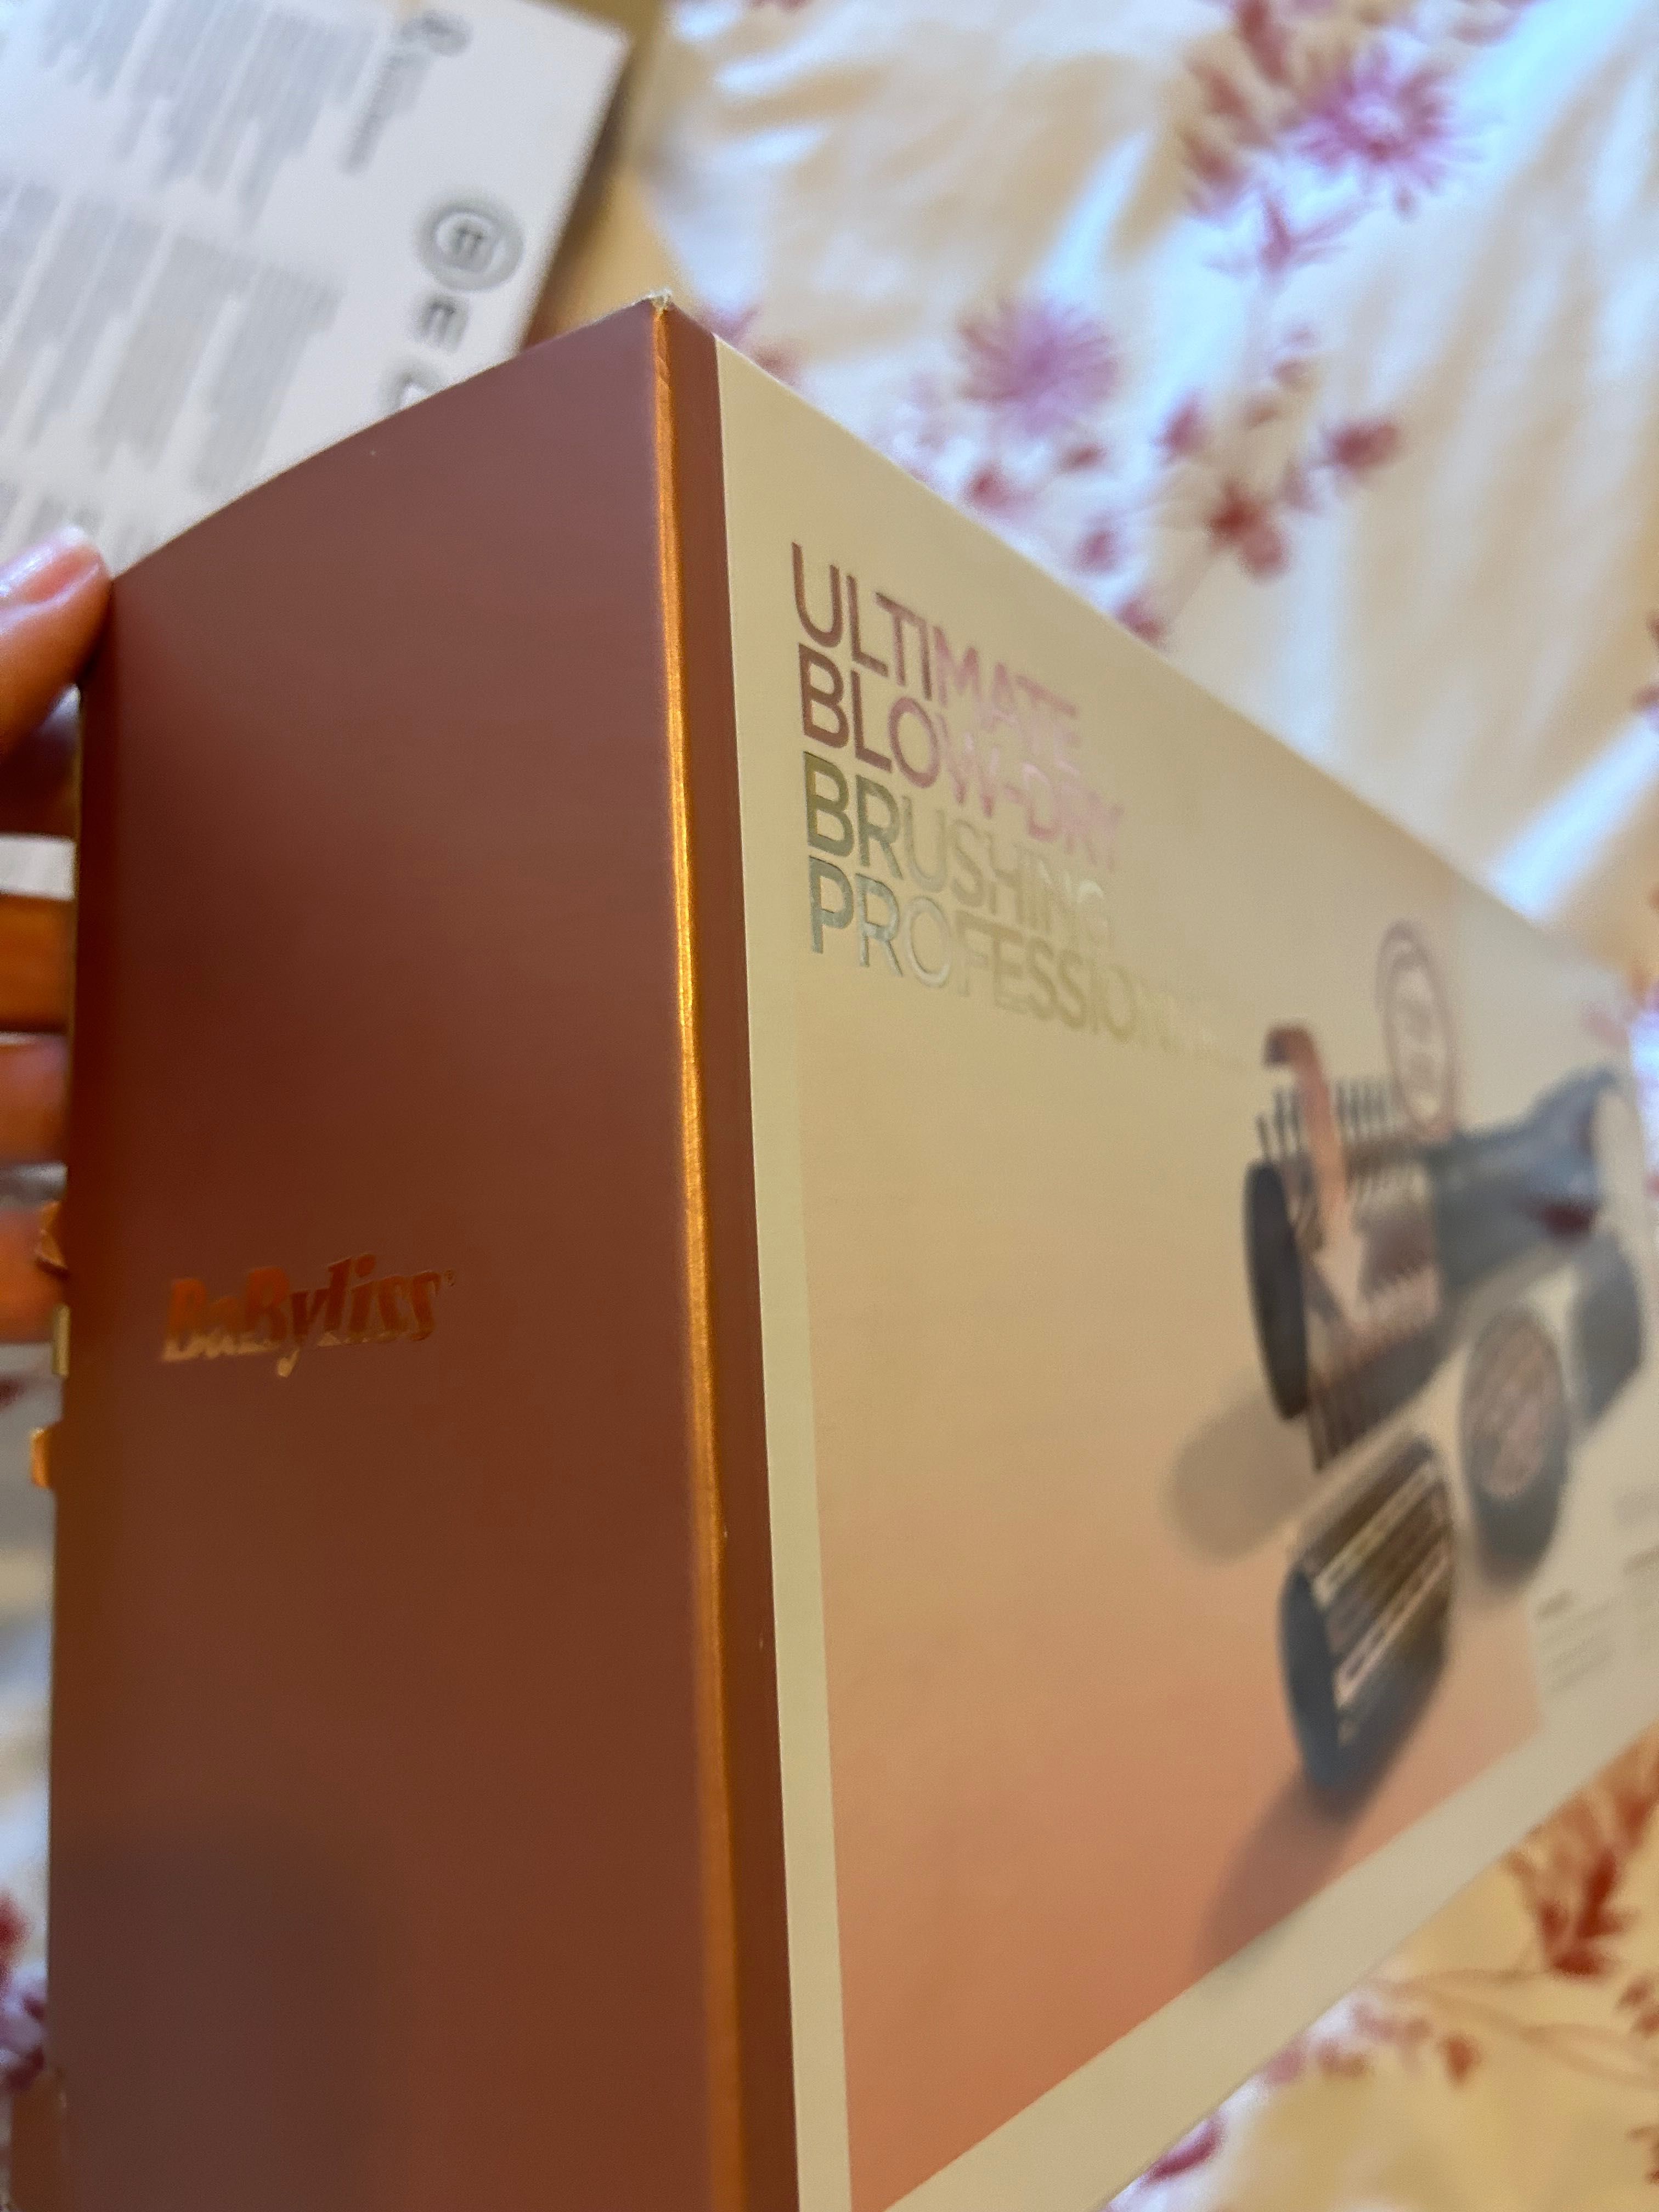 Babyliss Ultimate Blow Dry Brushing Professional a estrear